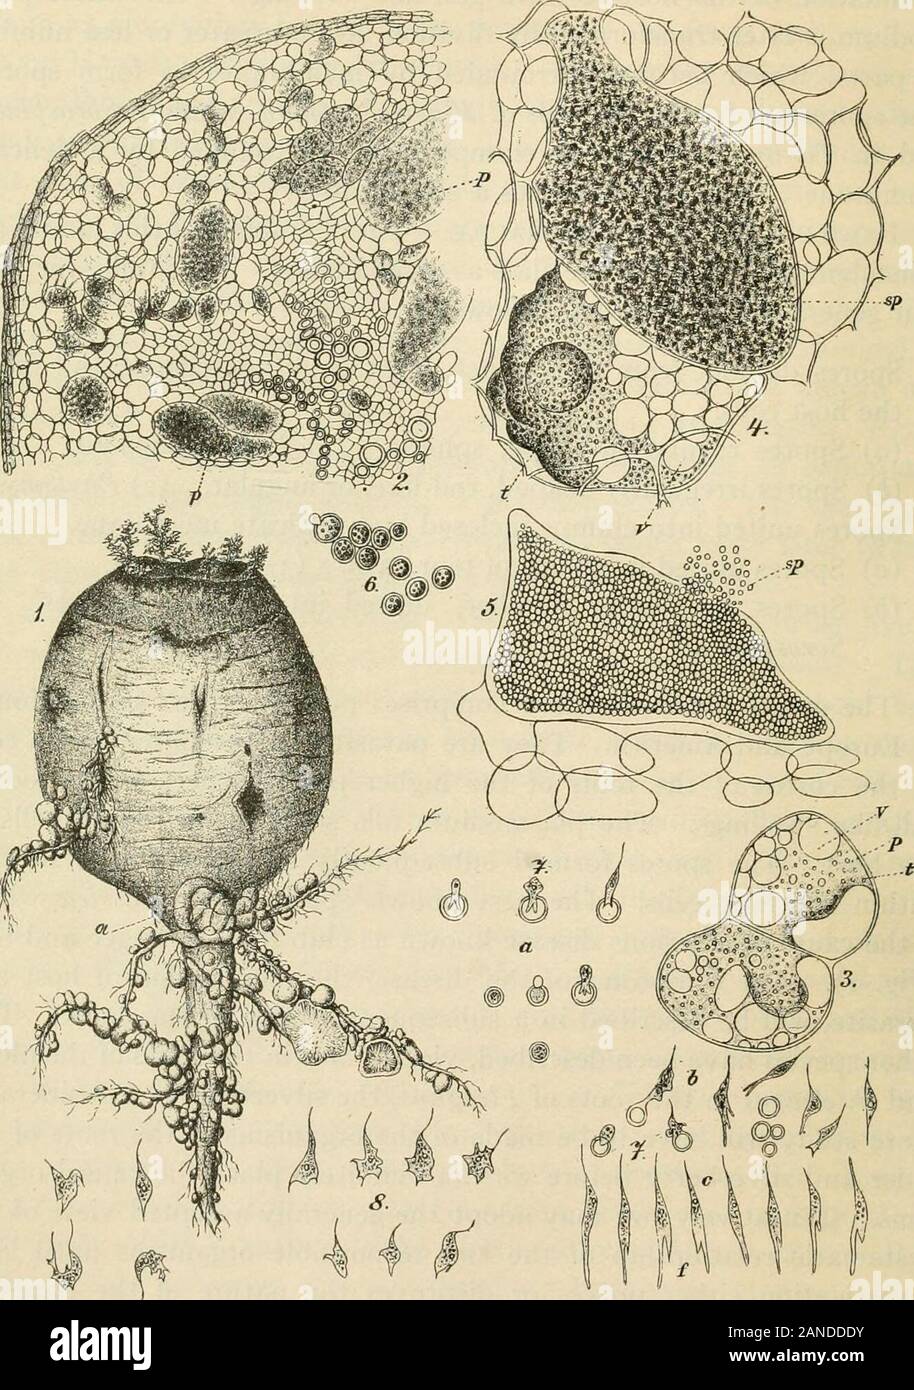 A text-book of mycology and plant pathology . he host cells. The best known species is P. brassica whichis the cause of a serious disease known as club foot, or finger and toes(Fig. i). The symptoms of the disease, the relationship of host andparasite, will be described in a subsequent section of this book. Twoother species have been described, viz., P. alni in the roots of the alder;and P. eleagni in the roots of Eleagnus, the silverberry. Considerablemore study will have to be made of the organisms in the roots of thealder and silverberry before we can definitely place the causal organ-isms. Stock Photo